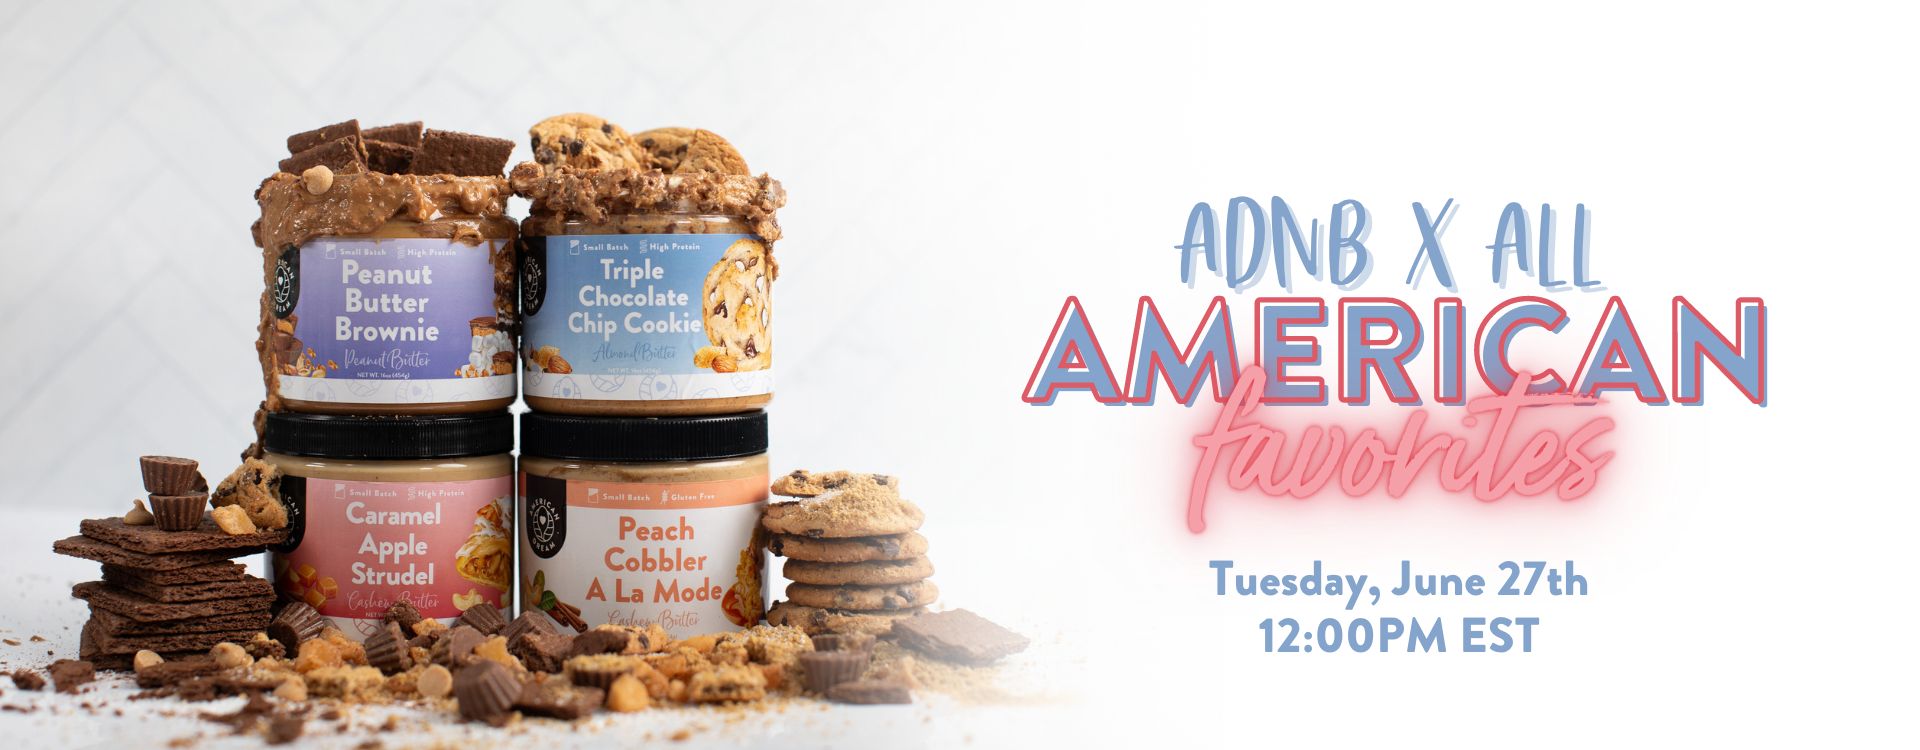 ADNB X All American Favorites Nut Butter Collection